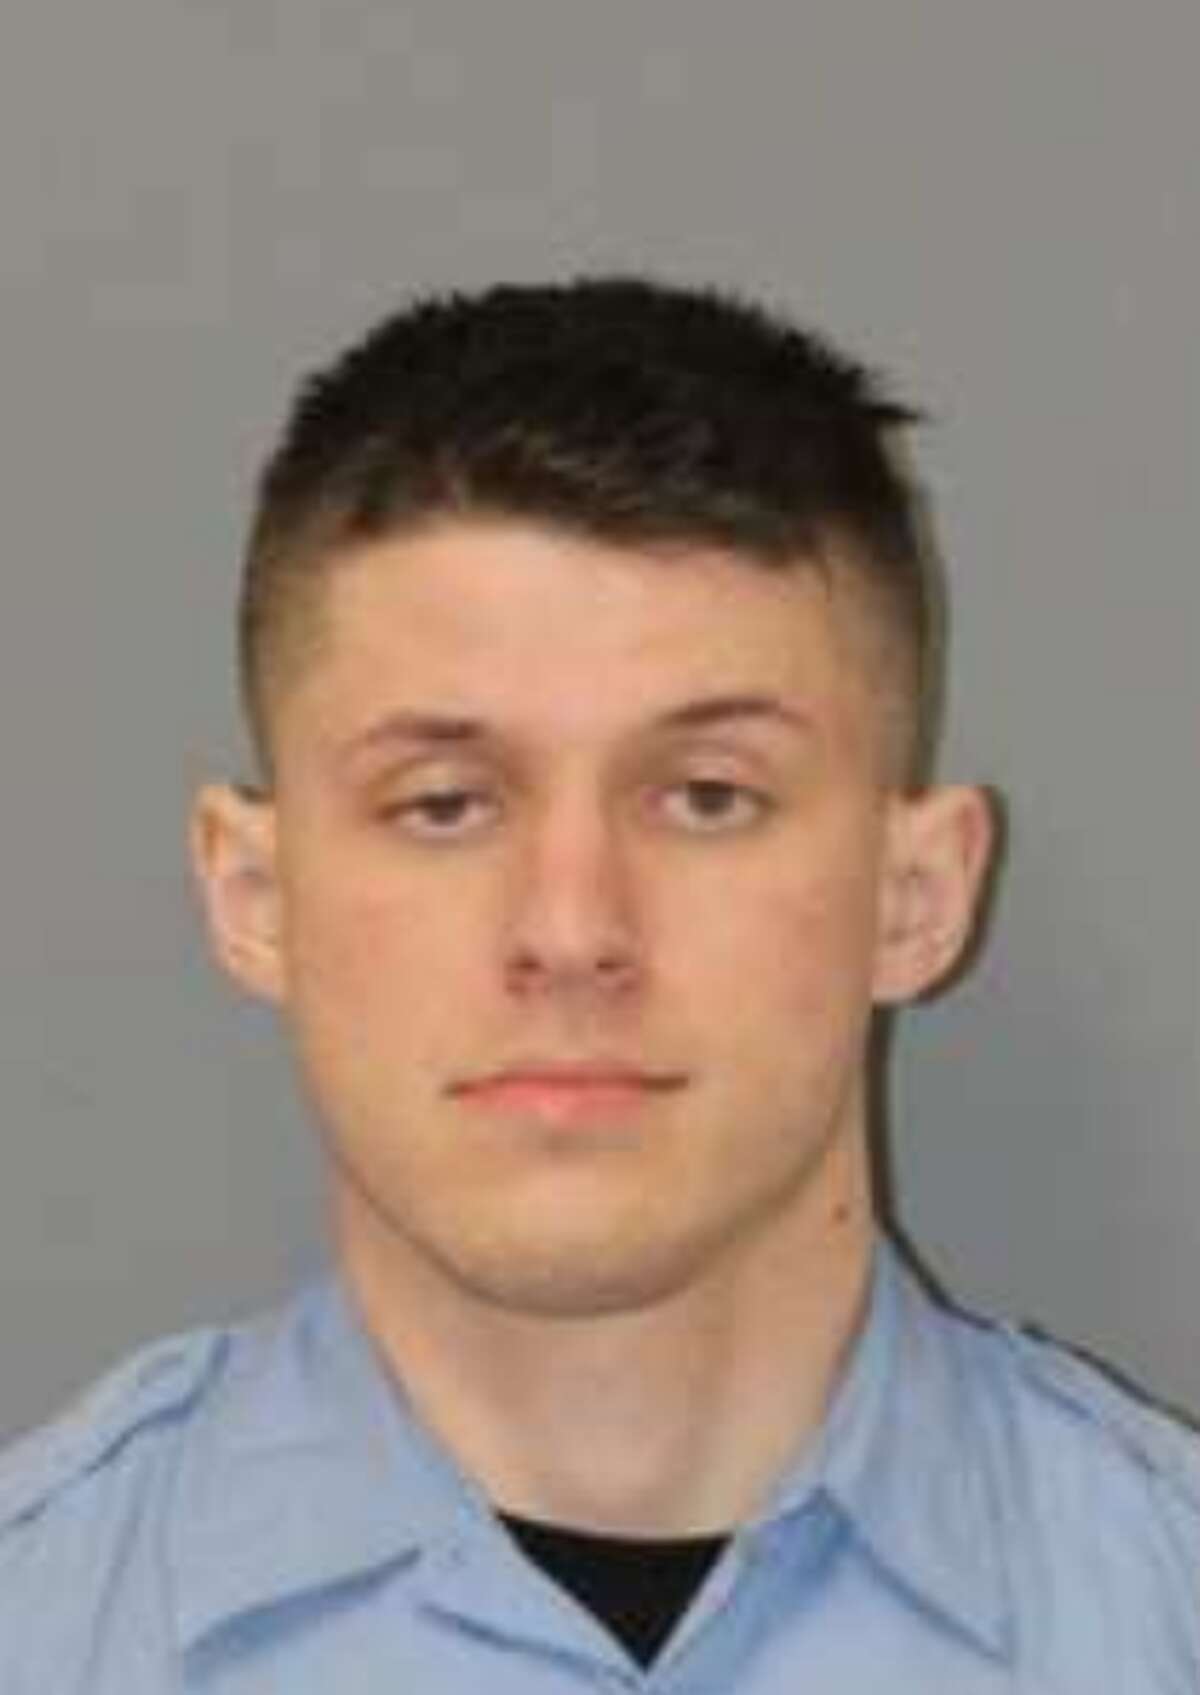 Bradley Doyle was arrested for a carjacking incident in Bridgeport.